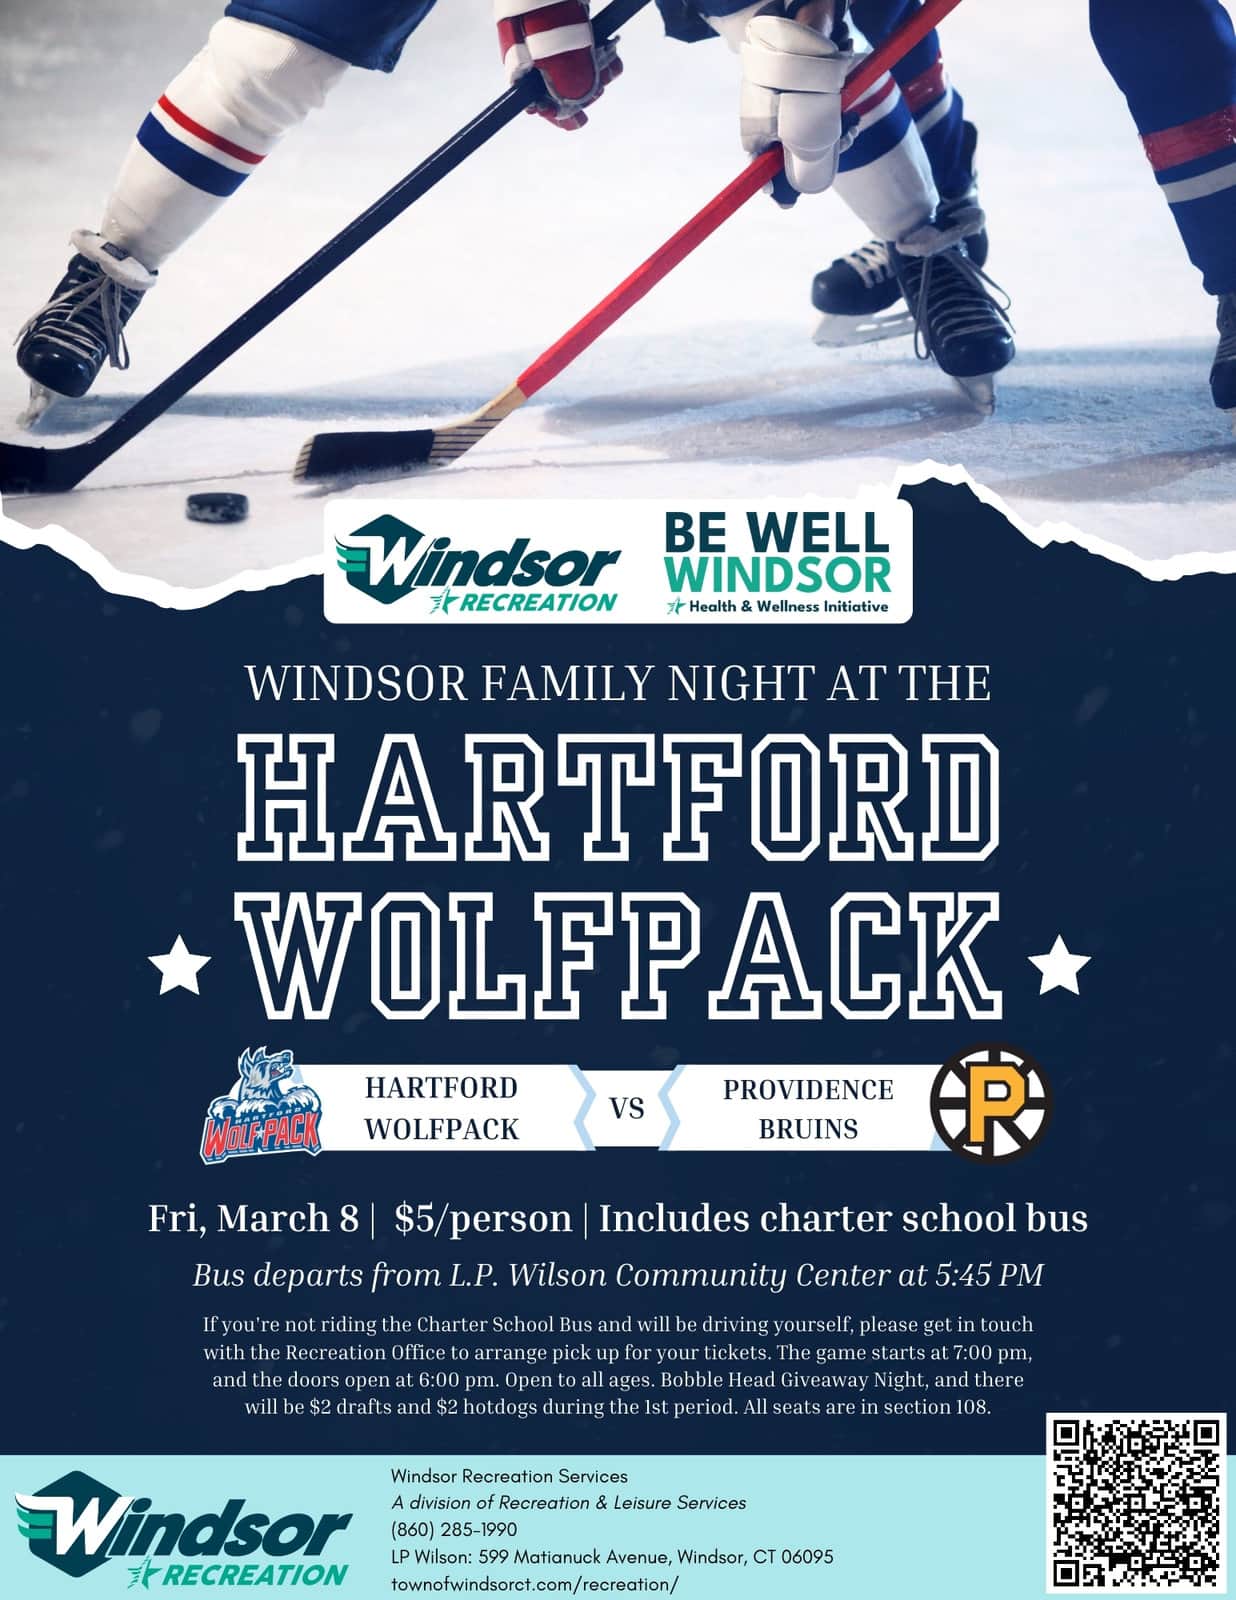 Windsor Family Night at the Hartford Wolfpack (All Ages)